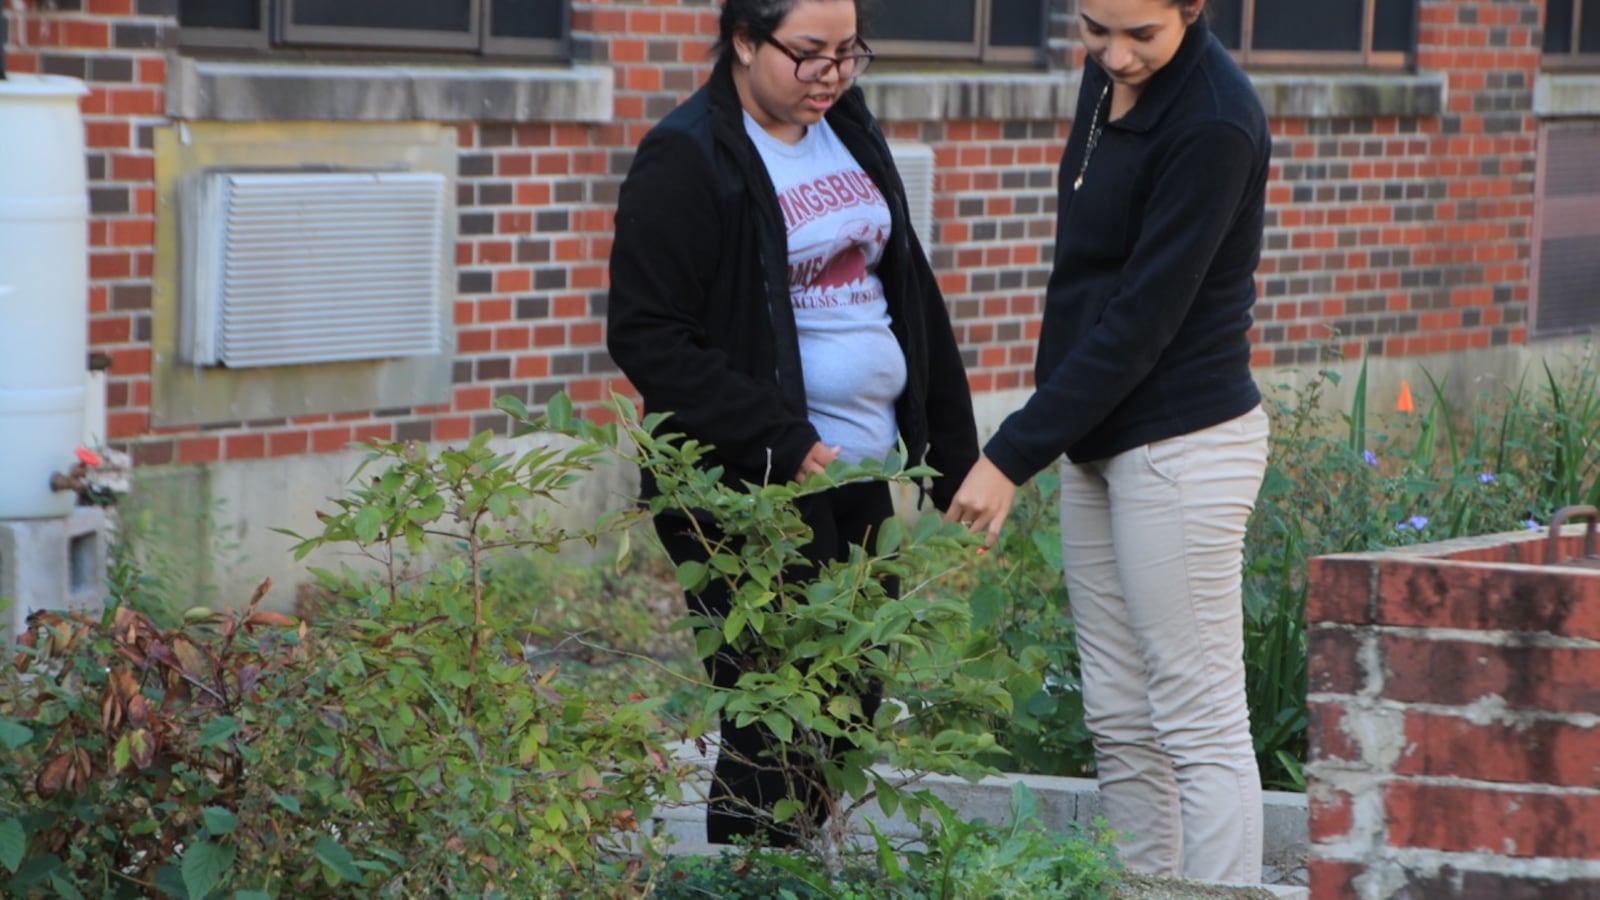 Students mill outside of Kingsbury High School in this 2016 photo. Kingsbury serves a significant number of immigrant students in Memphis, and many participated Thursday in nationwide protests to highlight what “A Day Without Immigrants" is like.